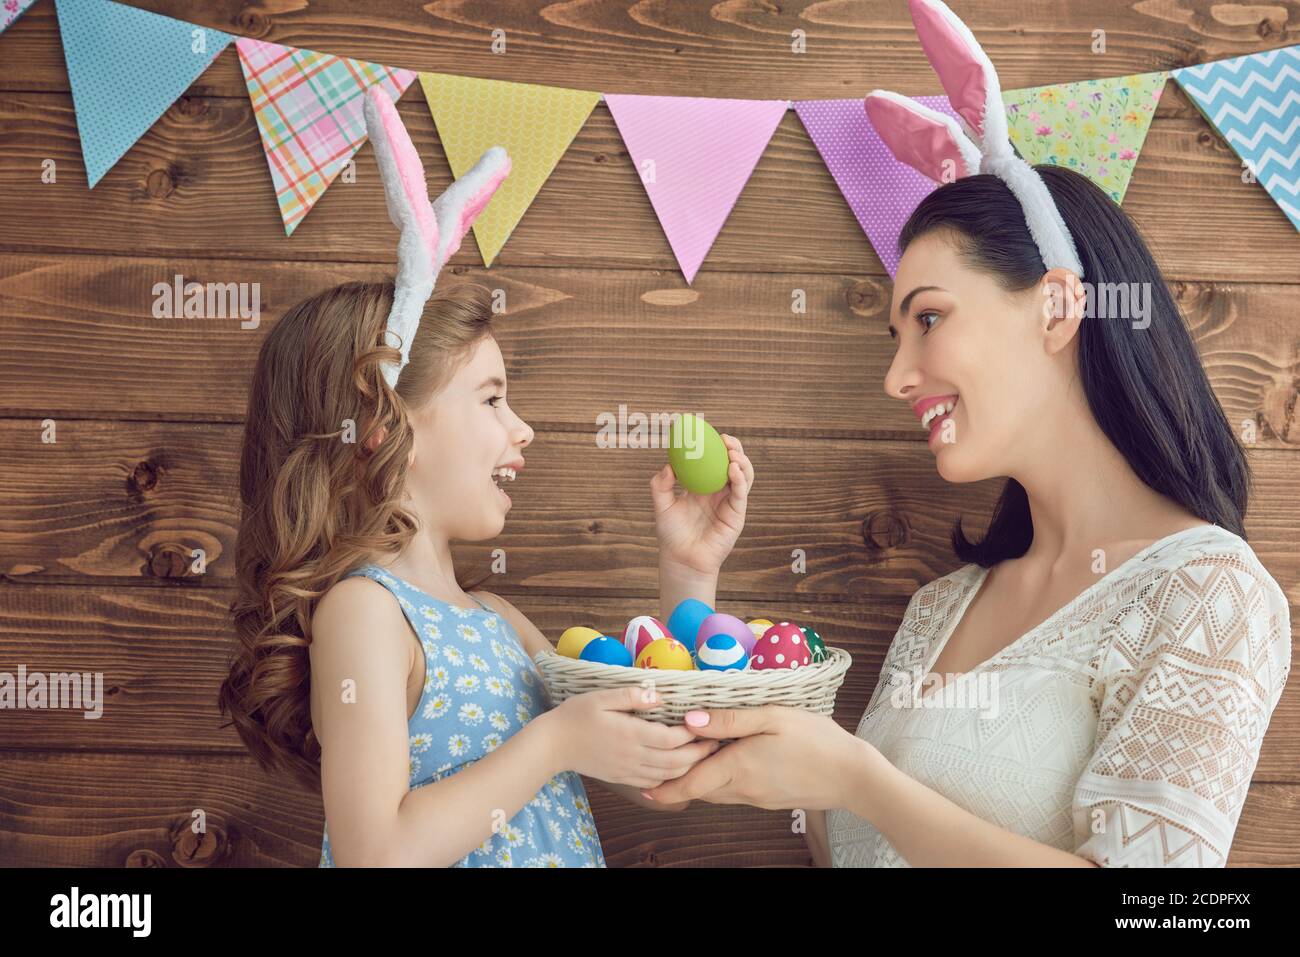 Mother and her daughter with painting eggs. Happy family celebrate Easter. Cute little child girl wearing bunny ears. Stock Photo